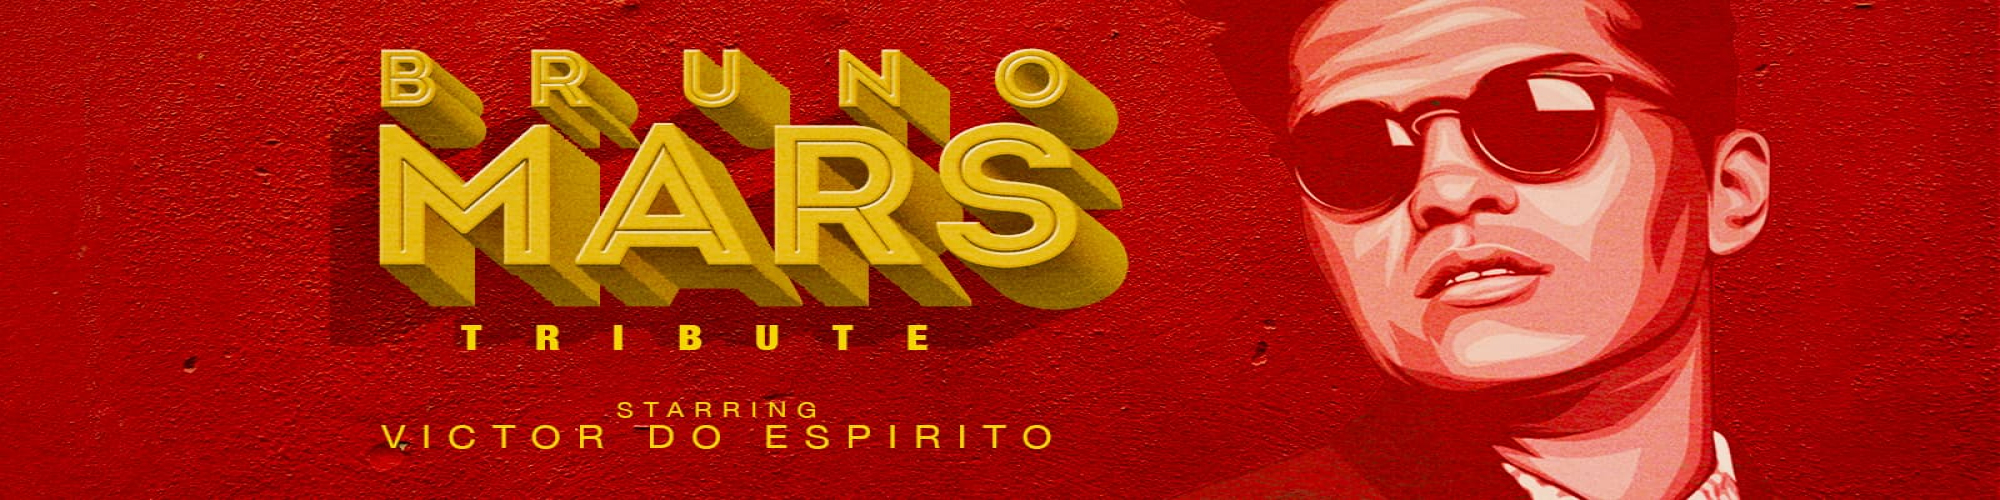 BRUNO MARS TRIBUTE SHOW (Red Room)